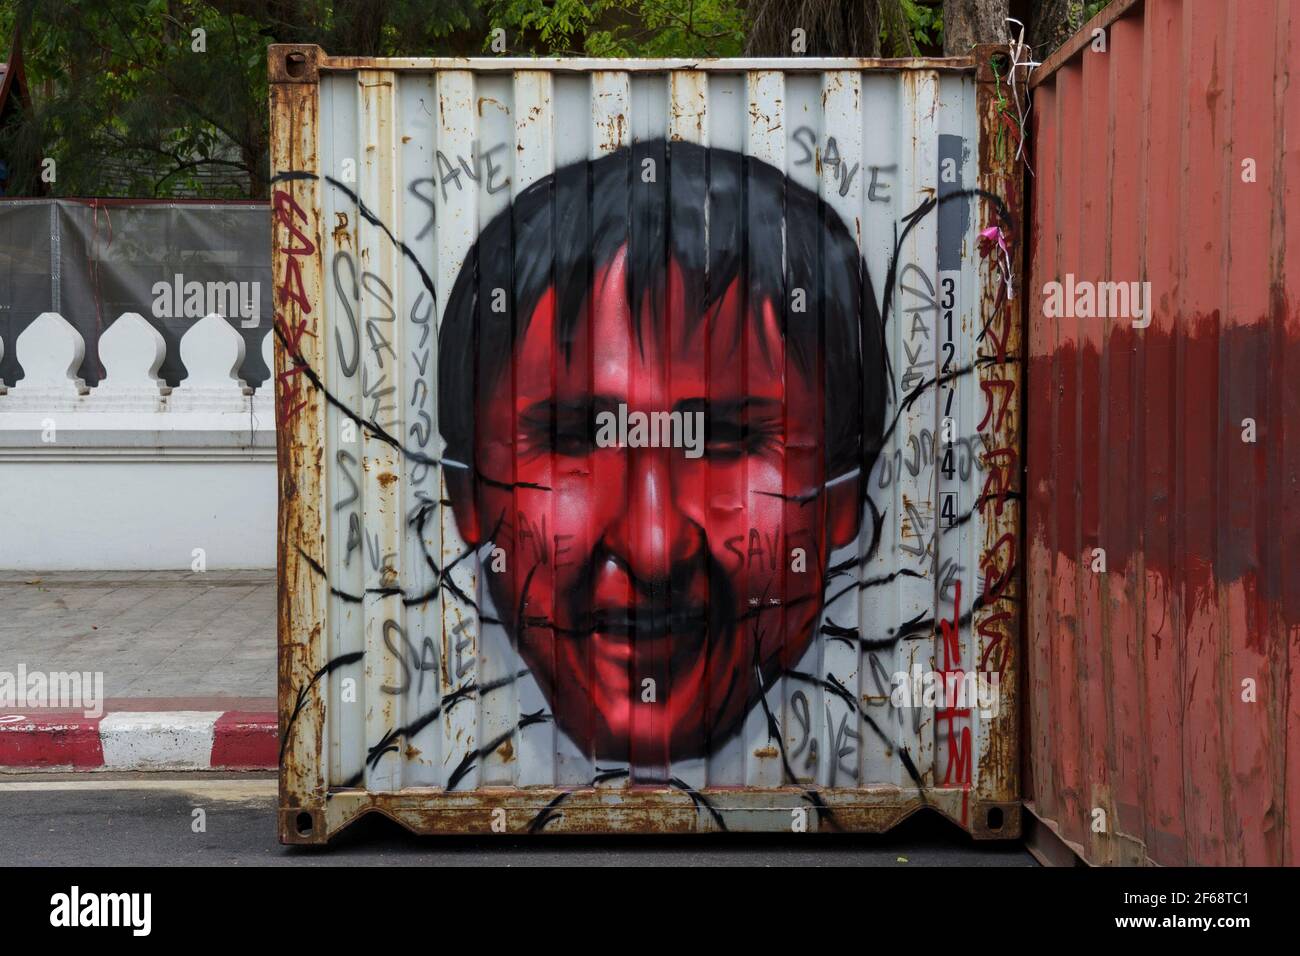 A Graffiti Art Of Porlajee Billy Rakchongcharoen An Activist From Kaeng Krachan Karen Ethnic Group Seen During The Demonstration Pro Democracy Protestors Gathered In Front Of Thailand S Government House To Protest After The Thai